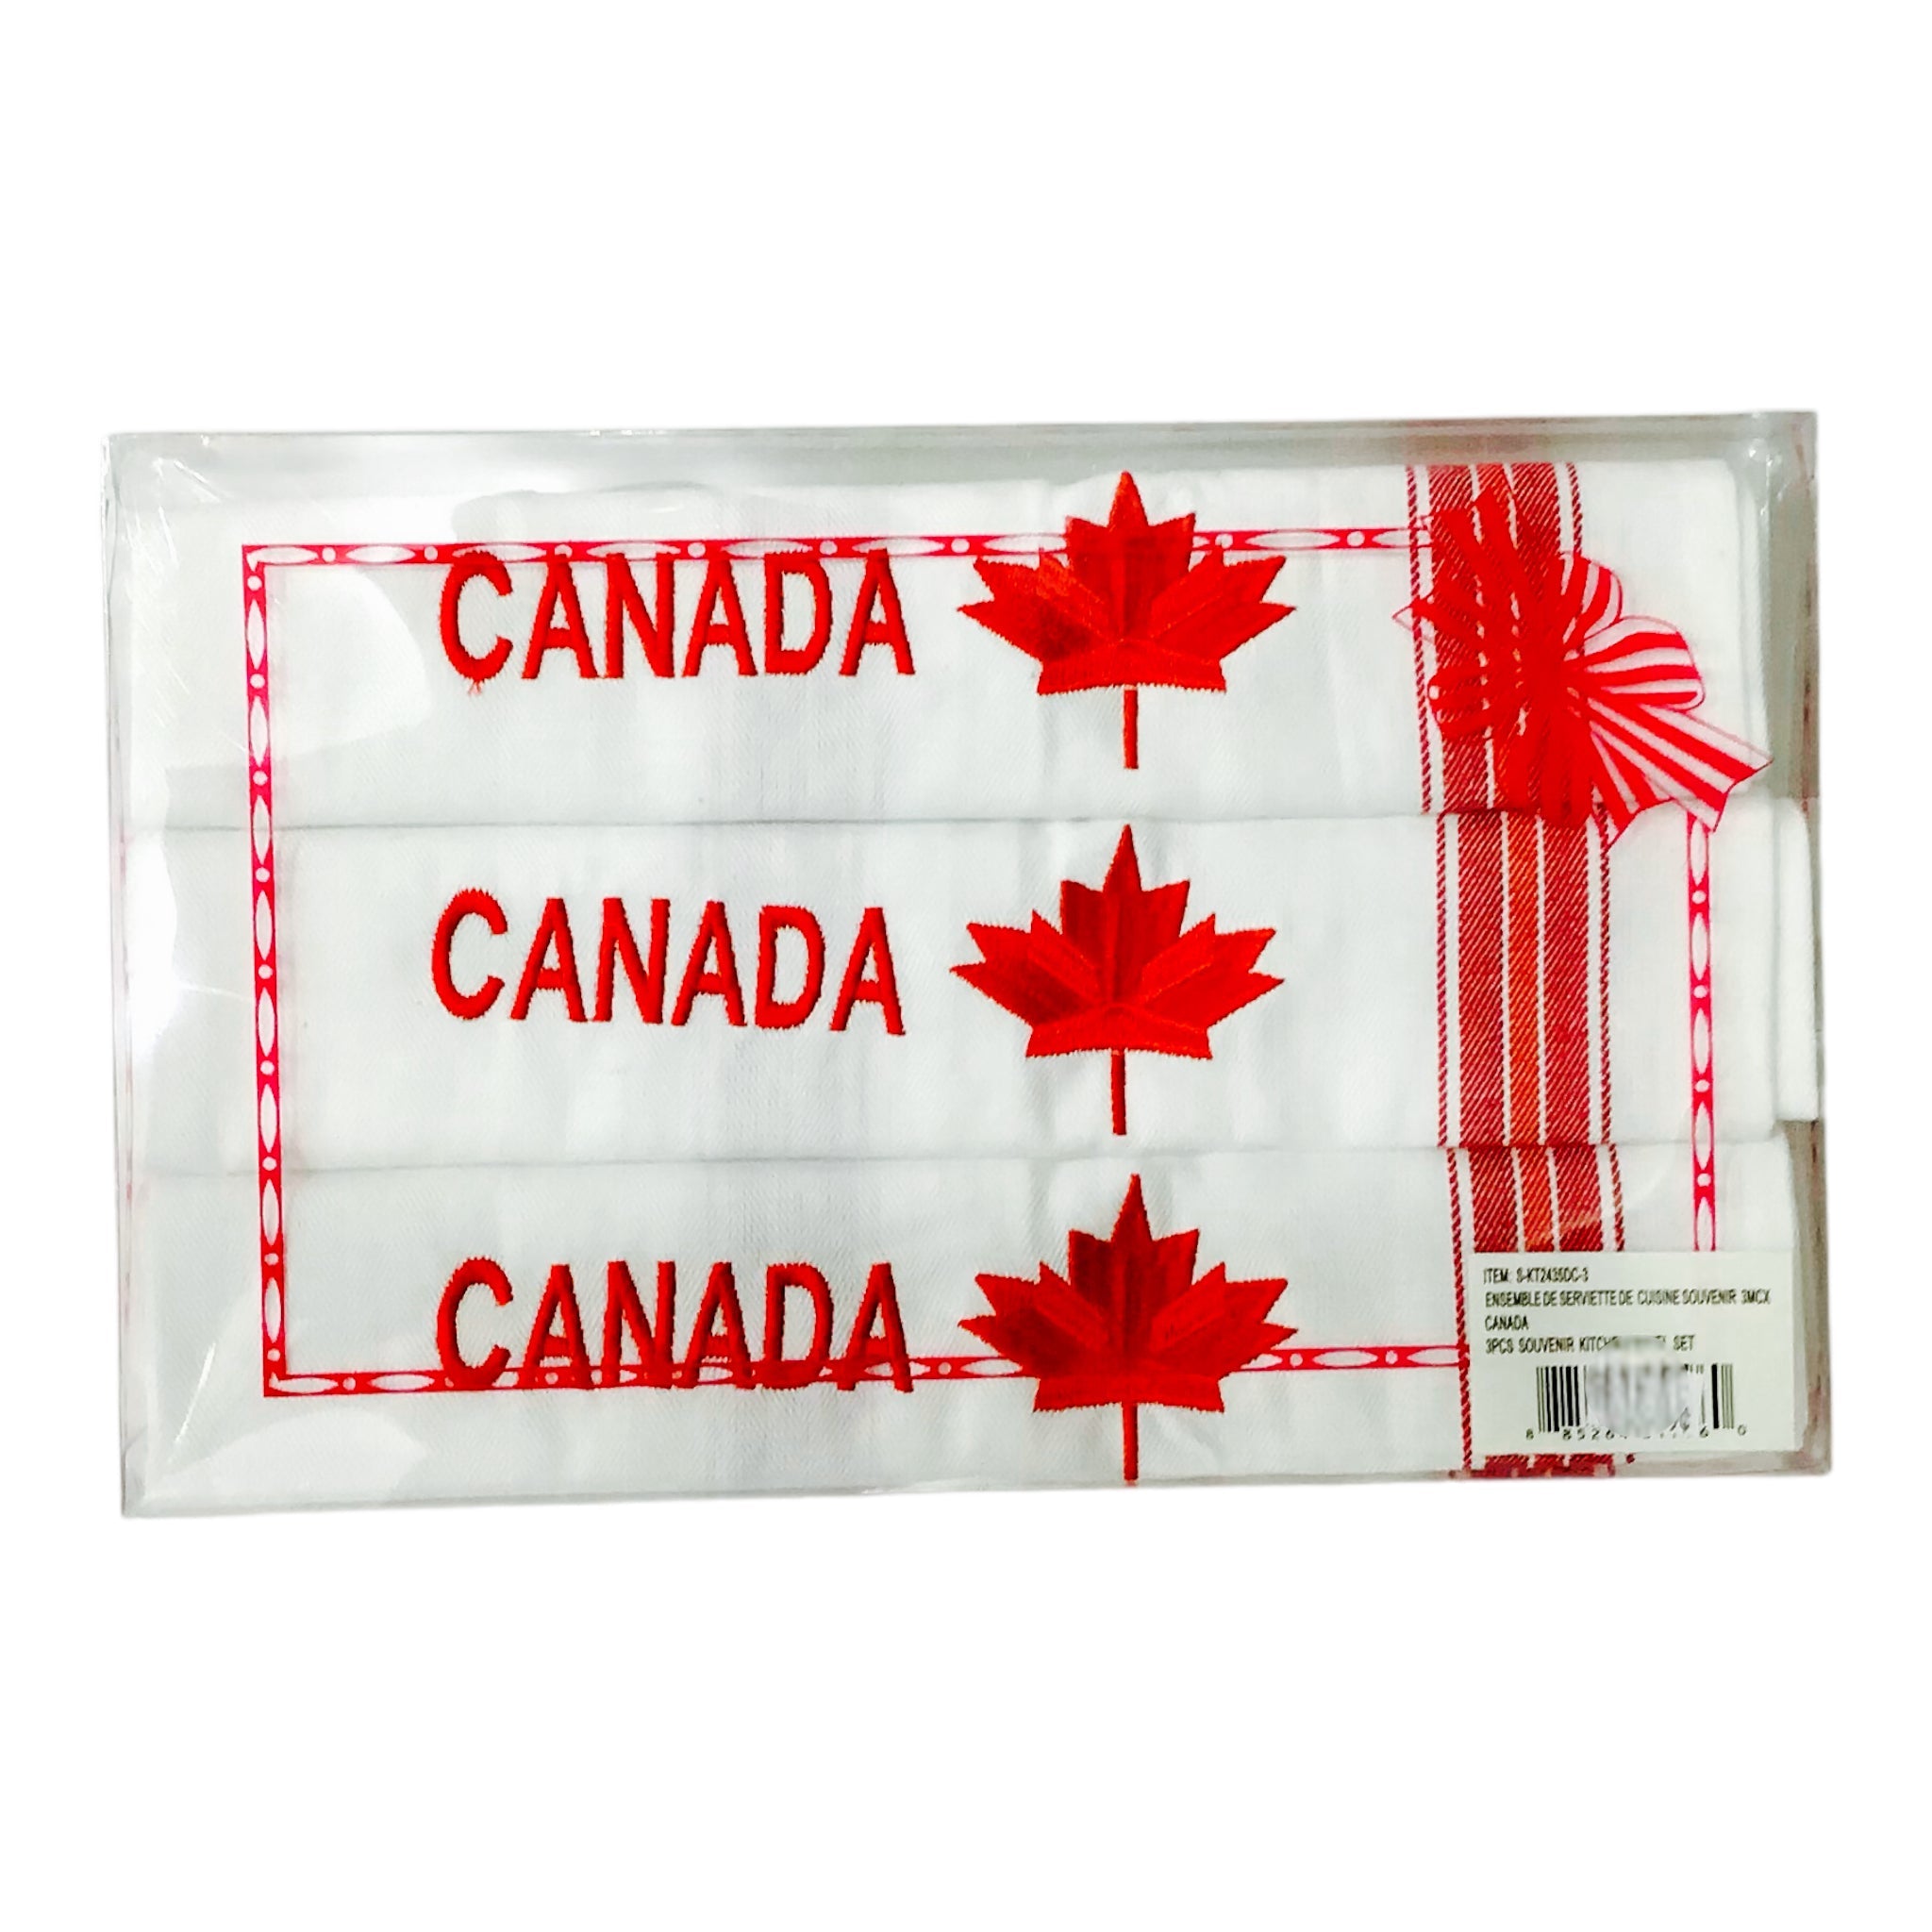 S/3 KITCHEN TOWELS CANADA MAPLE LEAF EMBROIDERY SOUVENIR GIFT PACK